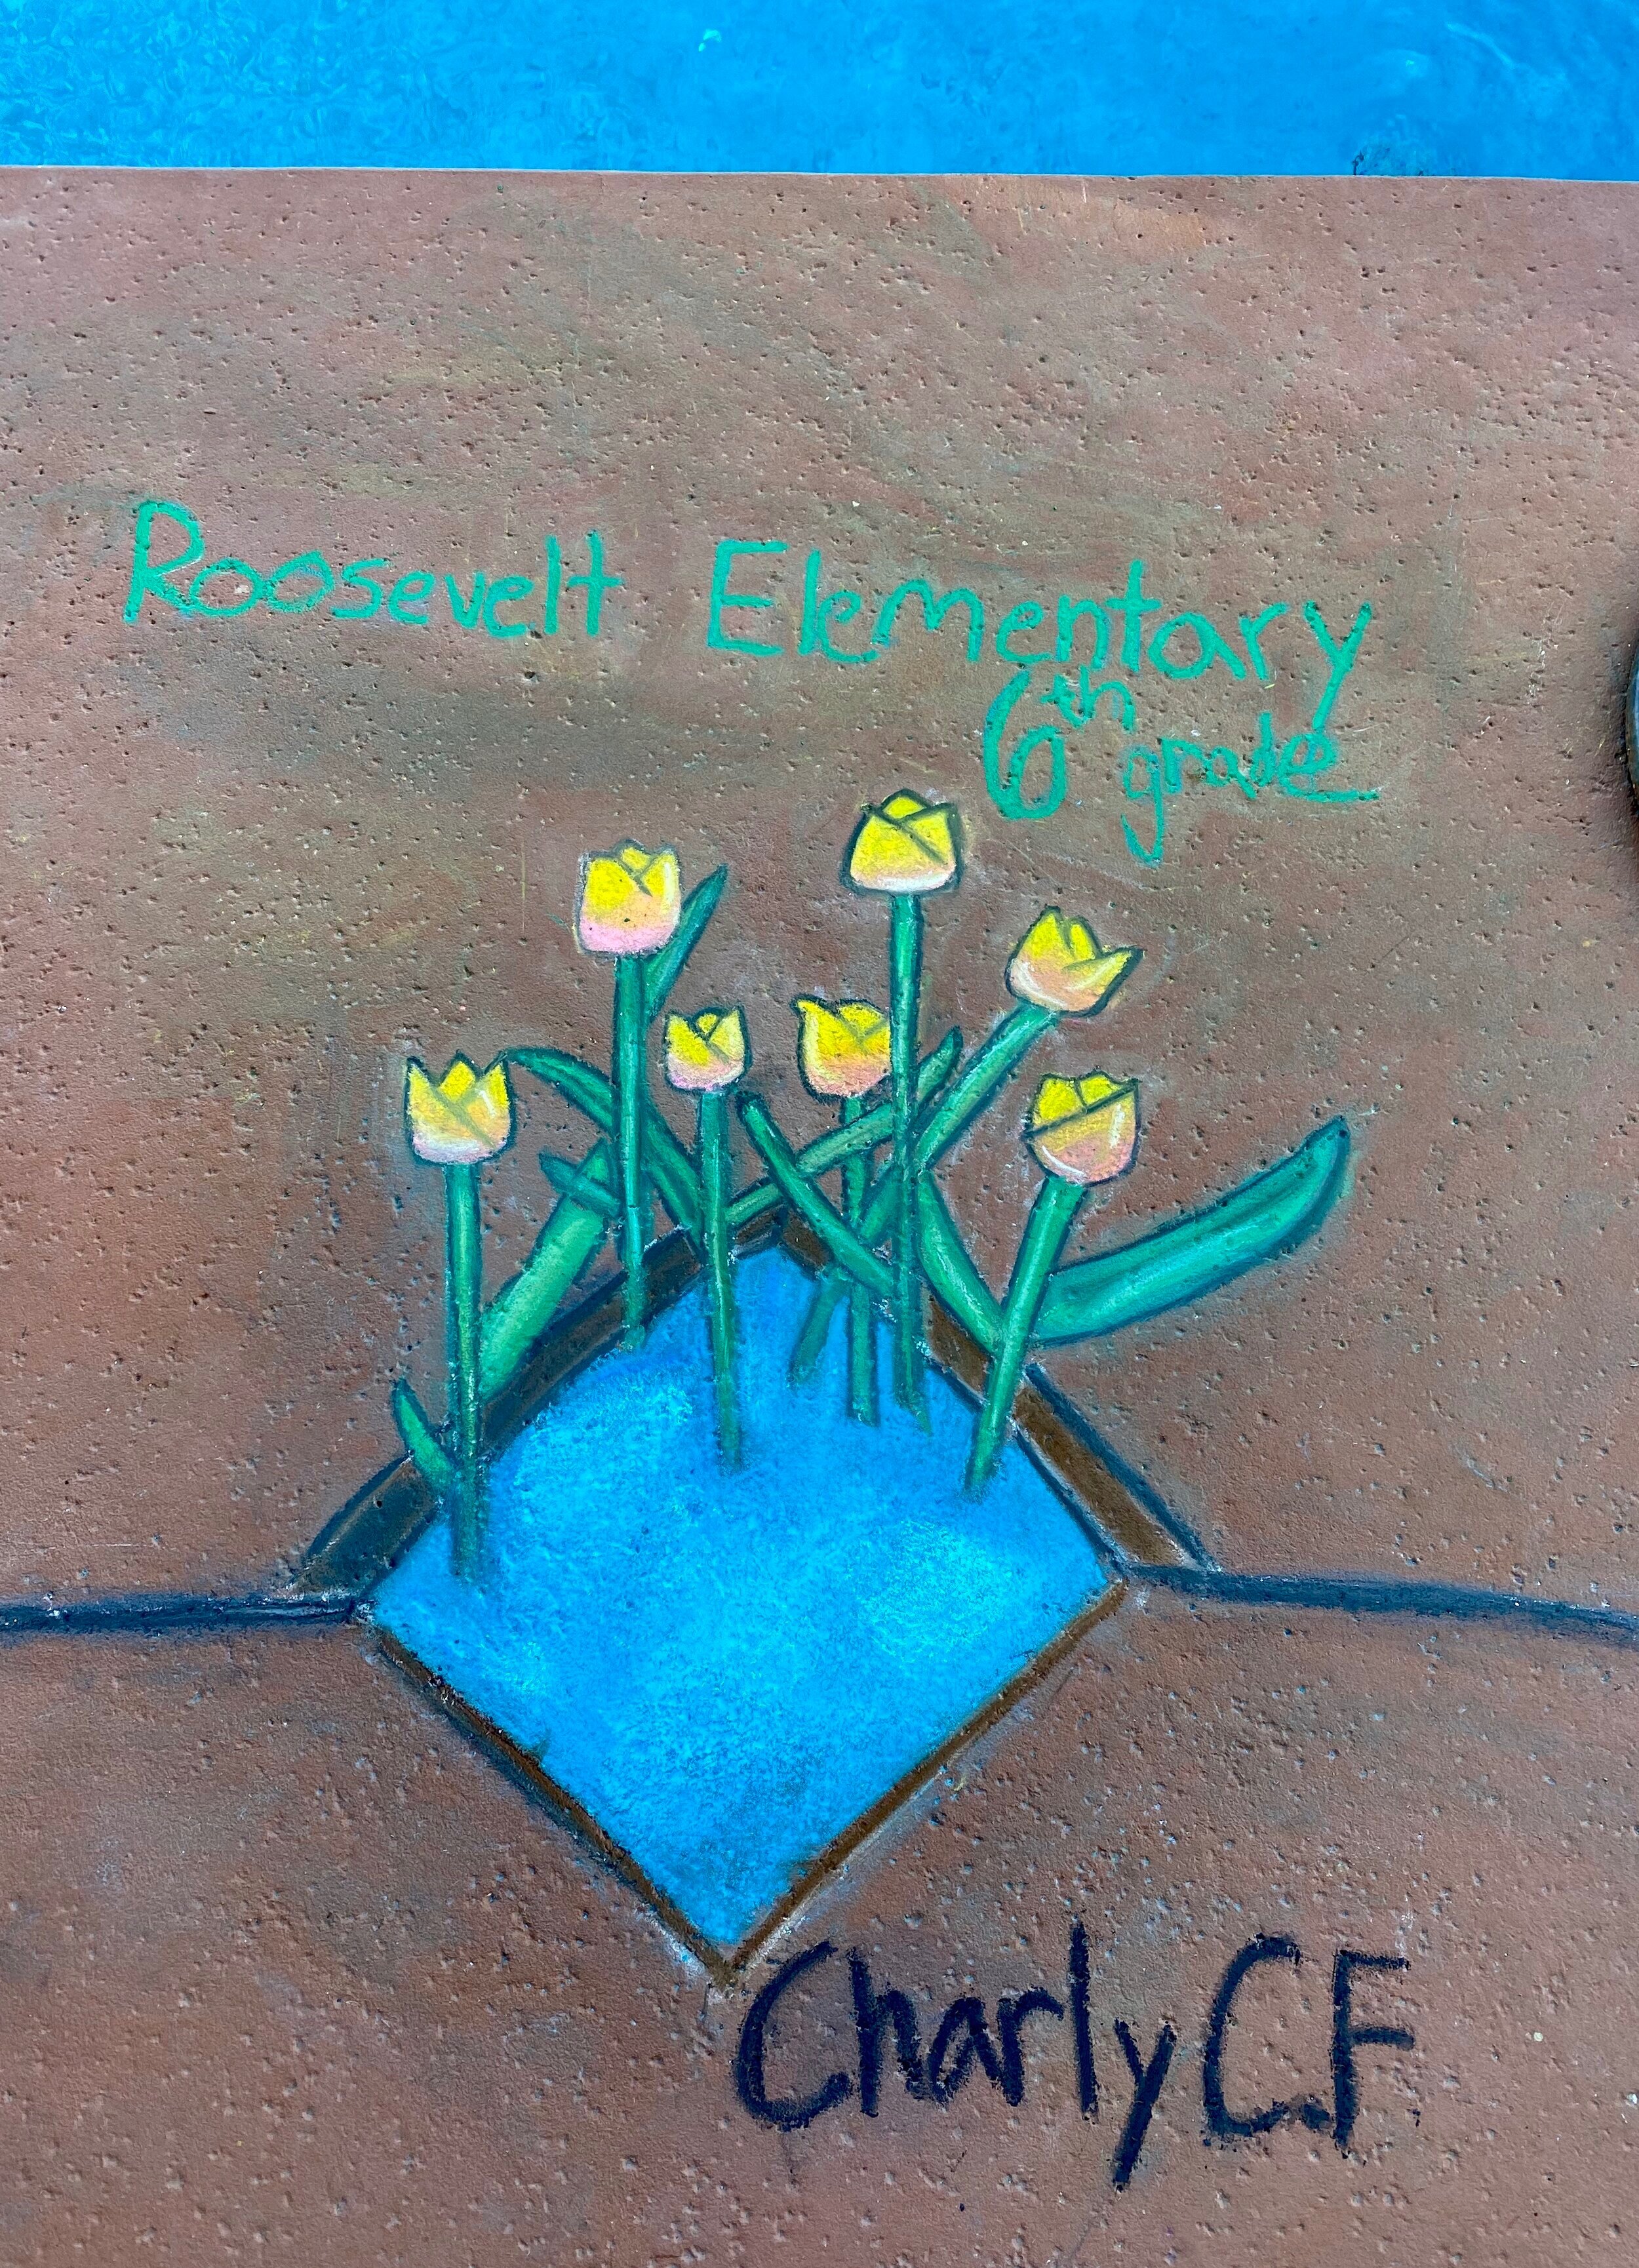 Roosevelt Elementary 6th grade by Charly CF